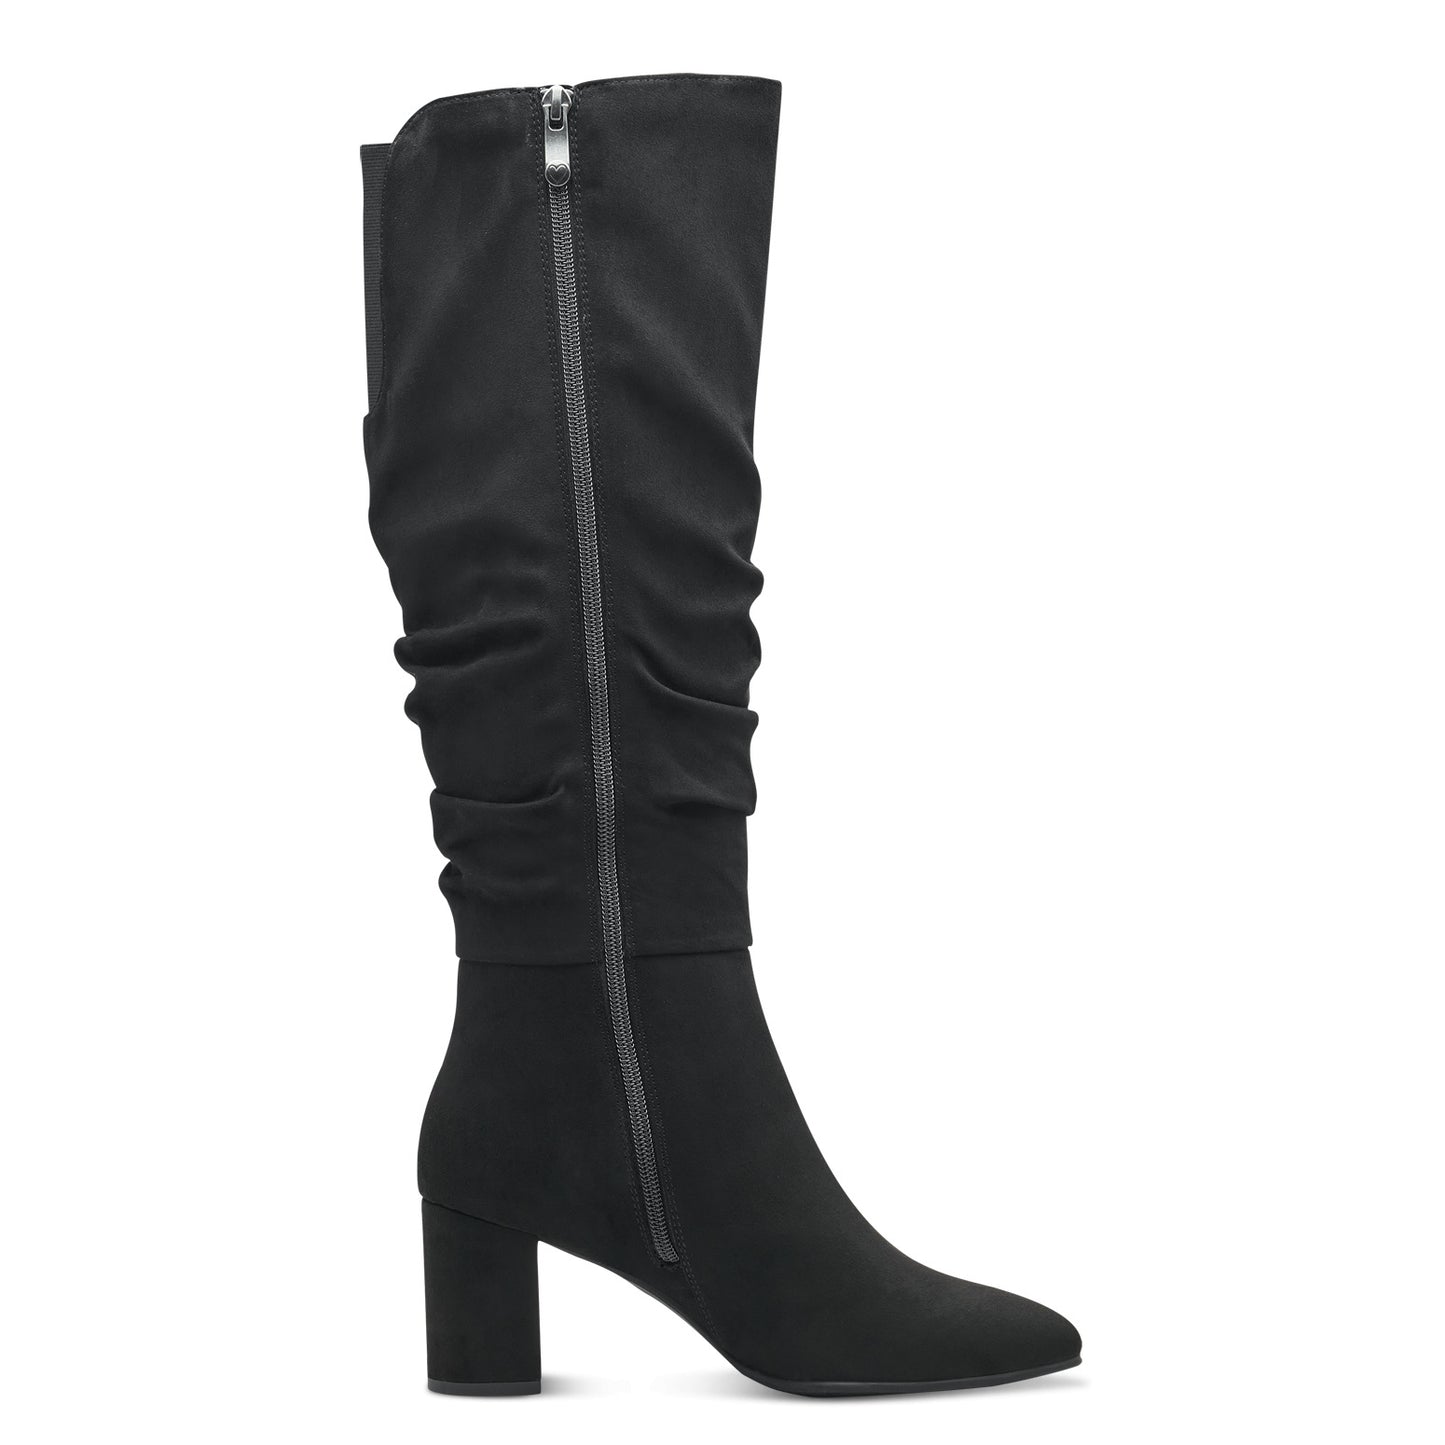 Marco Tozzi - Knee High Boot with Ruching - 25519 W3